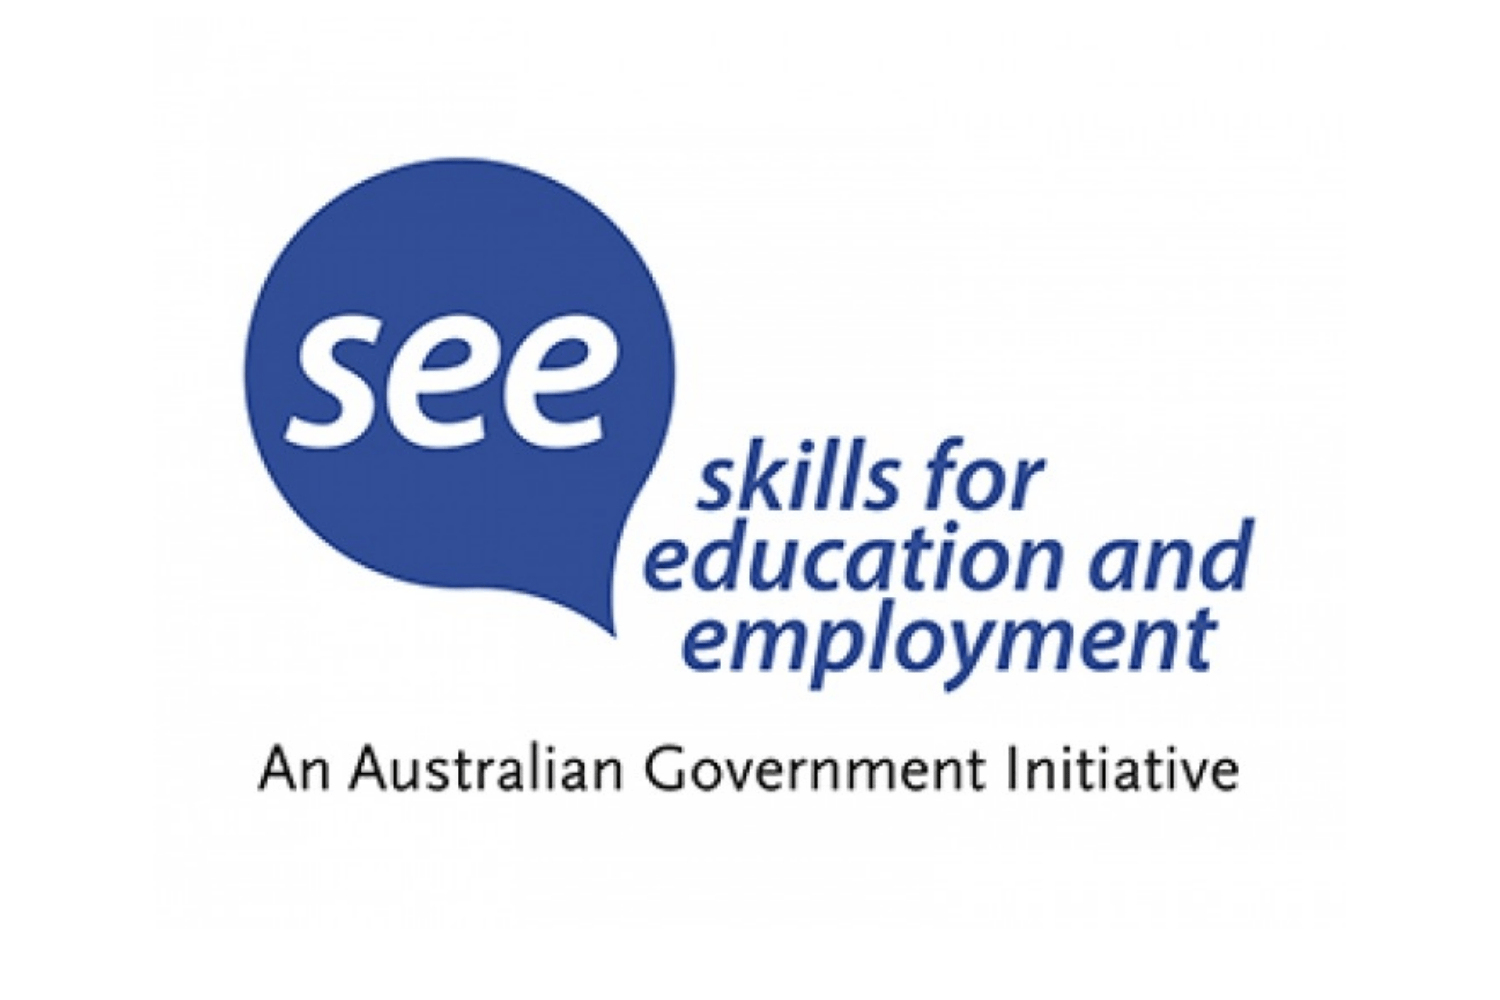 Skills for education and employment logo in blue